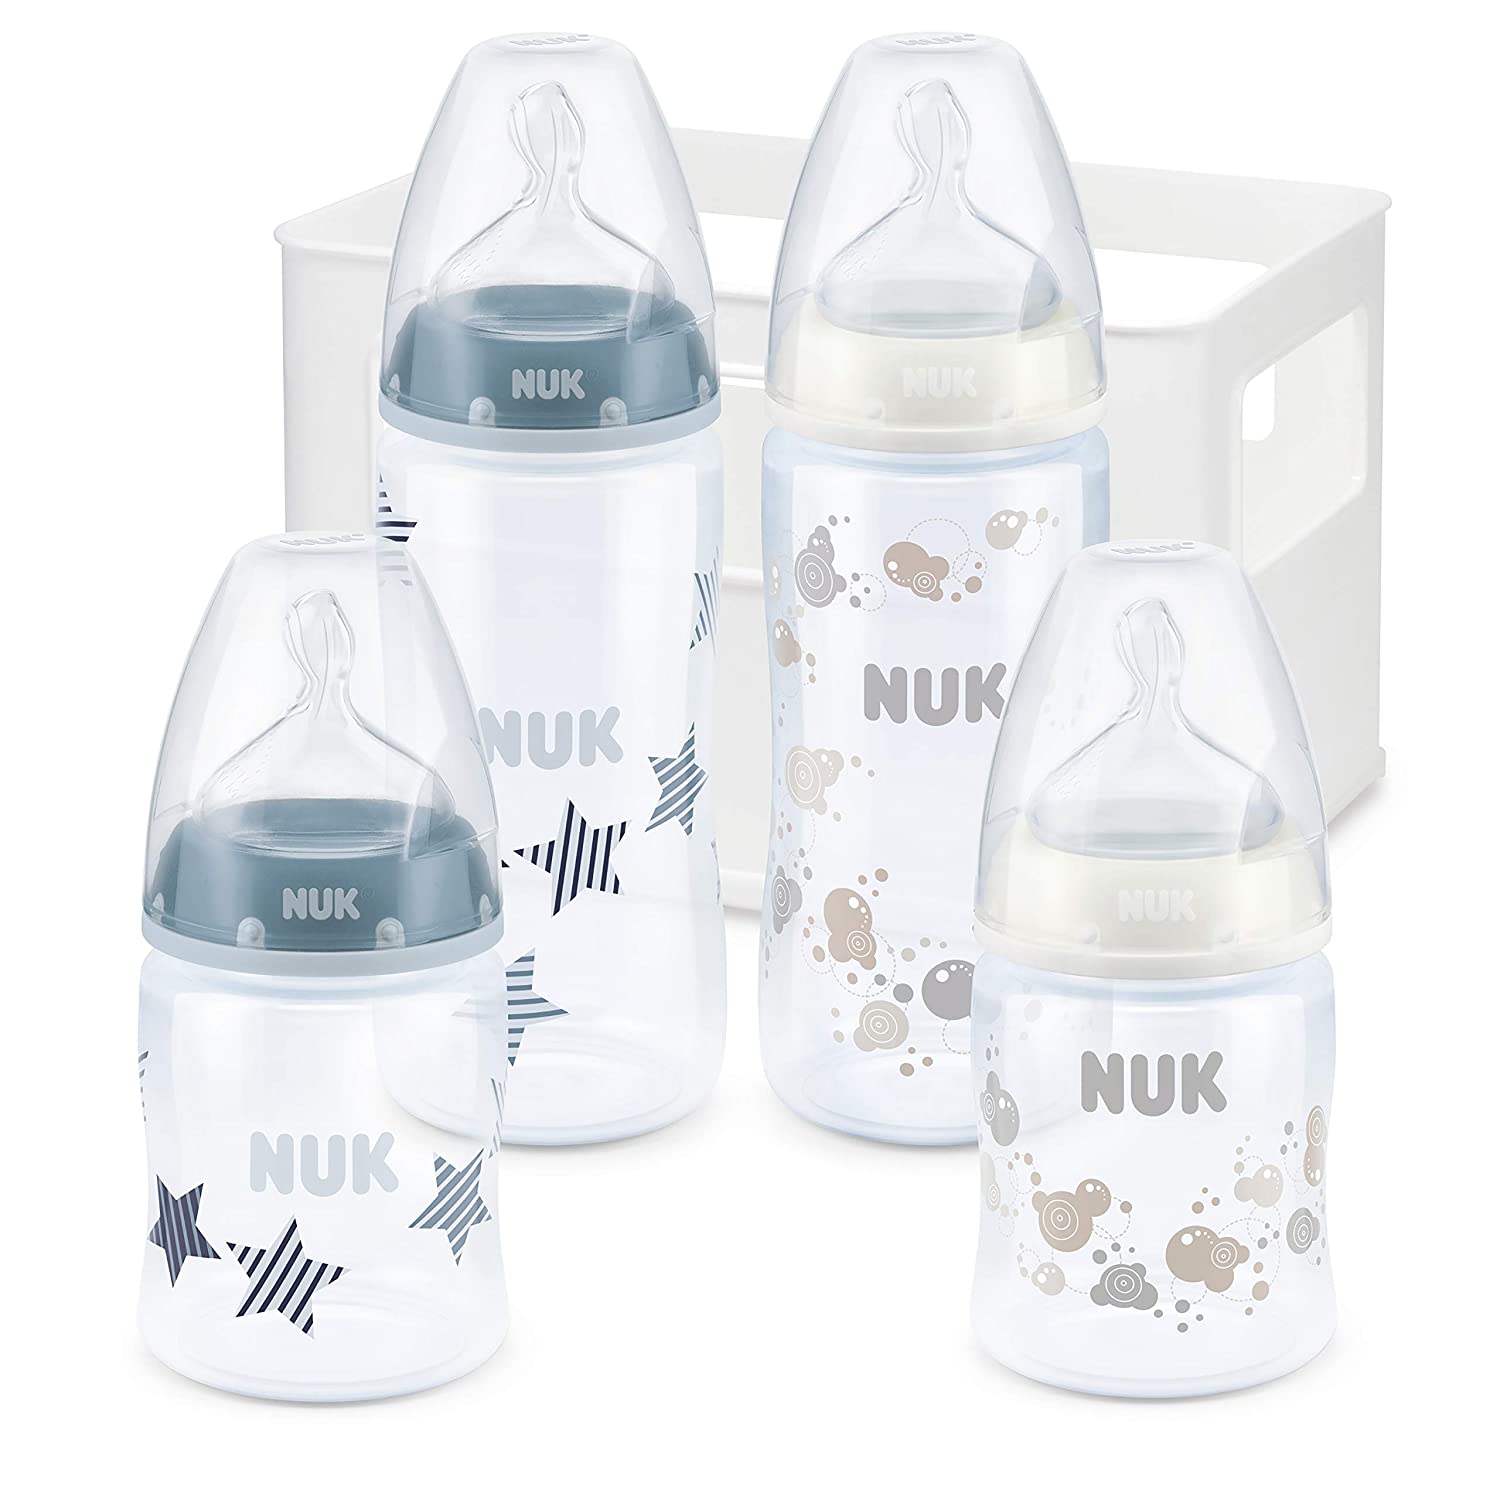 NUK First Choice⁺ Baby Bottle Starter Set Including Bottle Box, 0–6 Months, Anti-Colic, BPA-Free blue